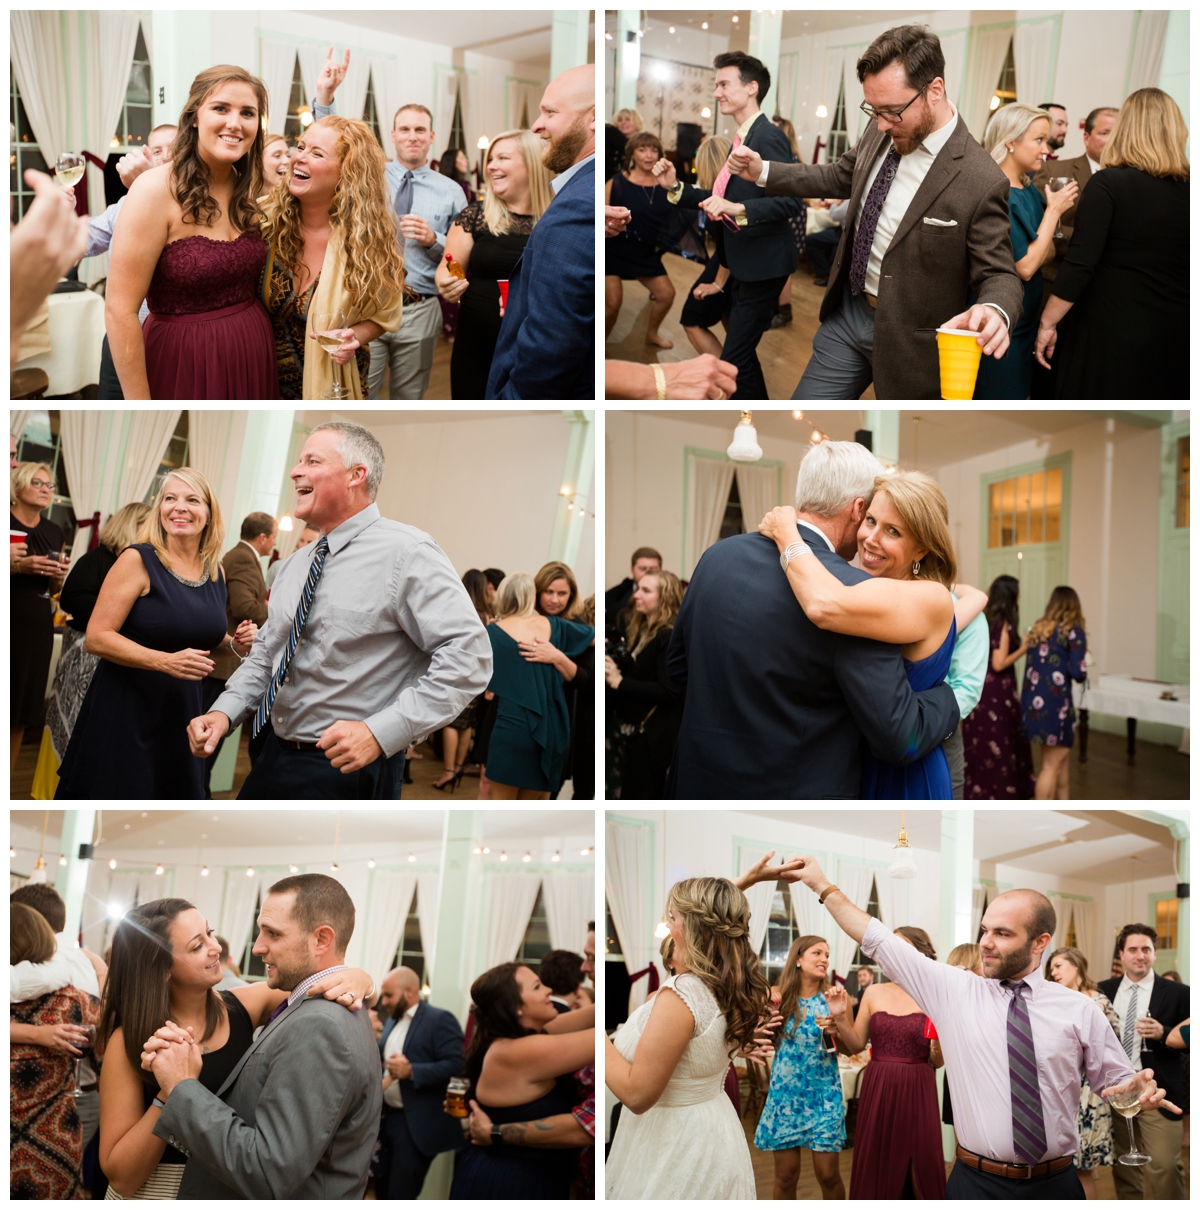 Guests on the dance floor at fall wedding